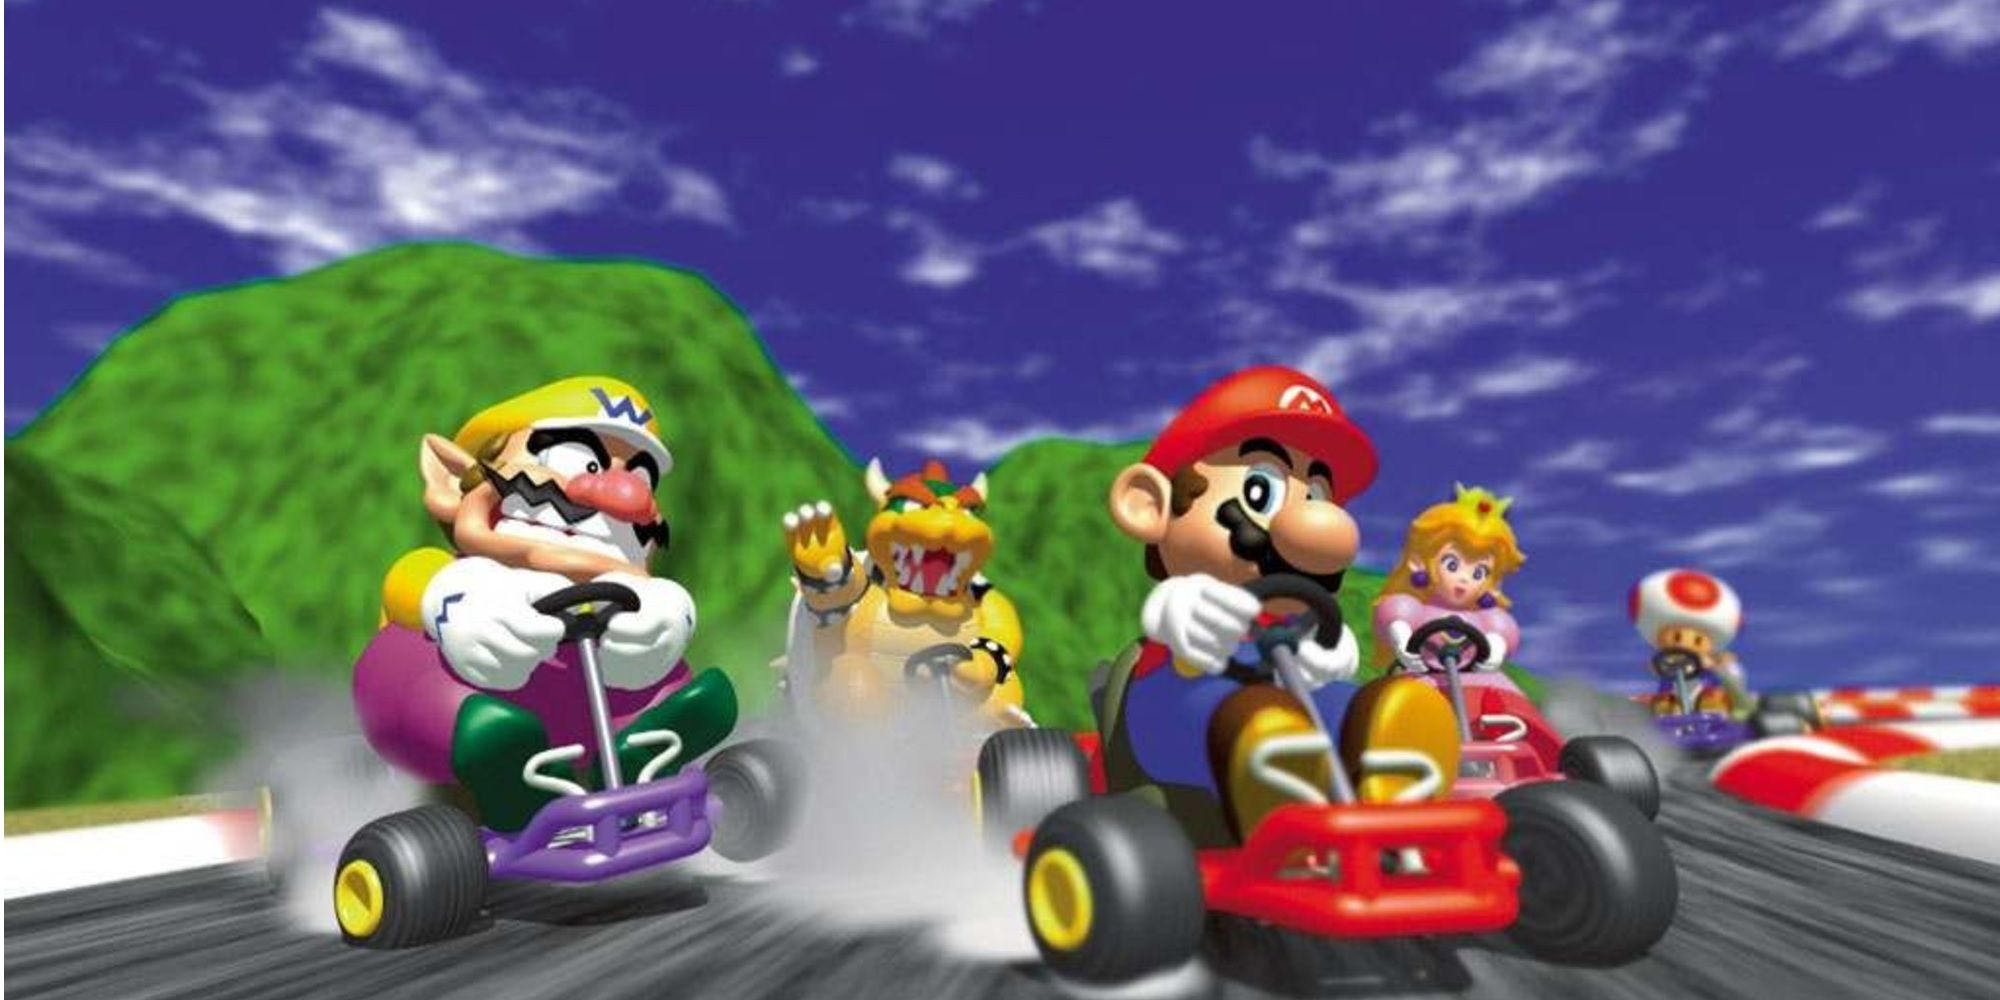 Several Mario characters drive into turn from Mario Kart 64